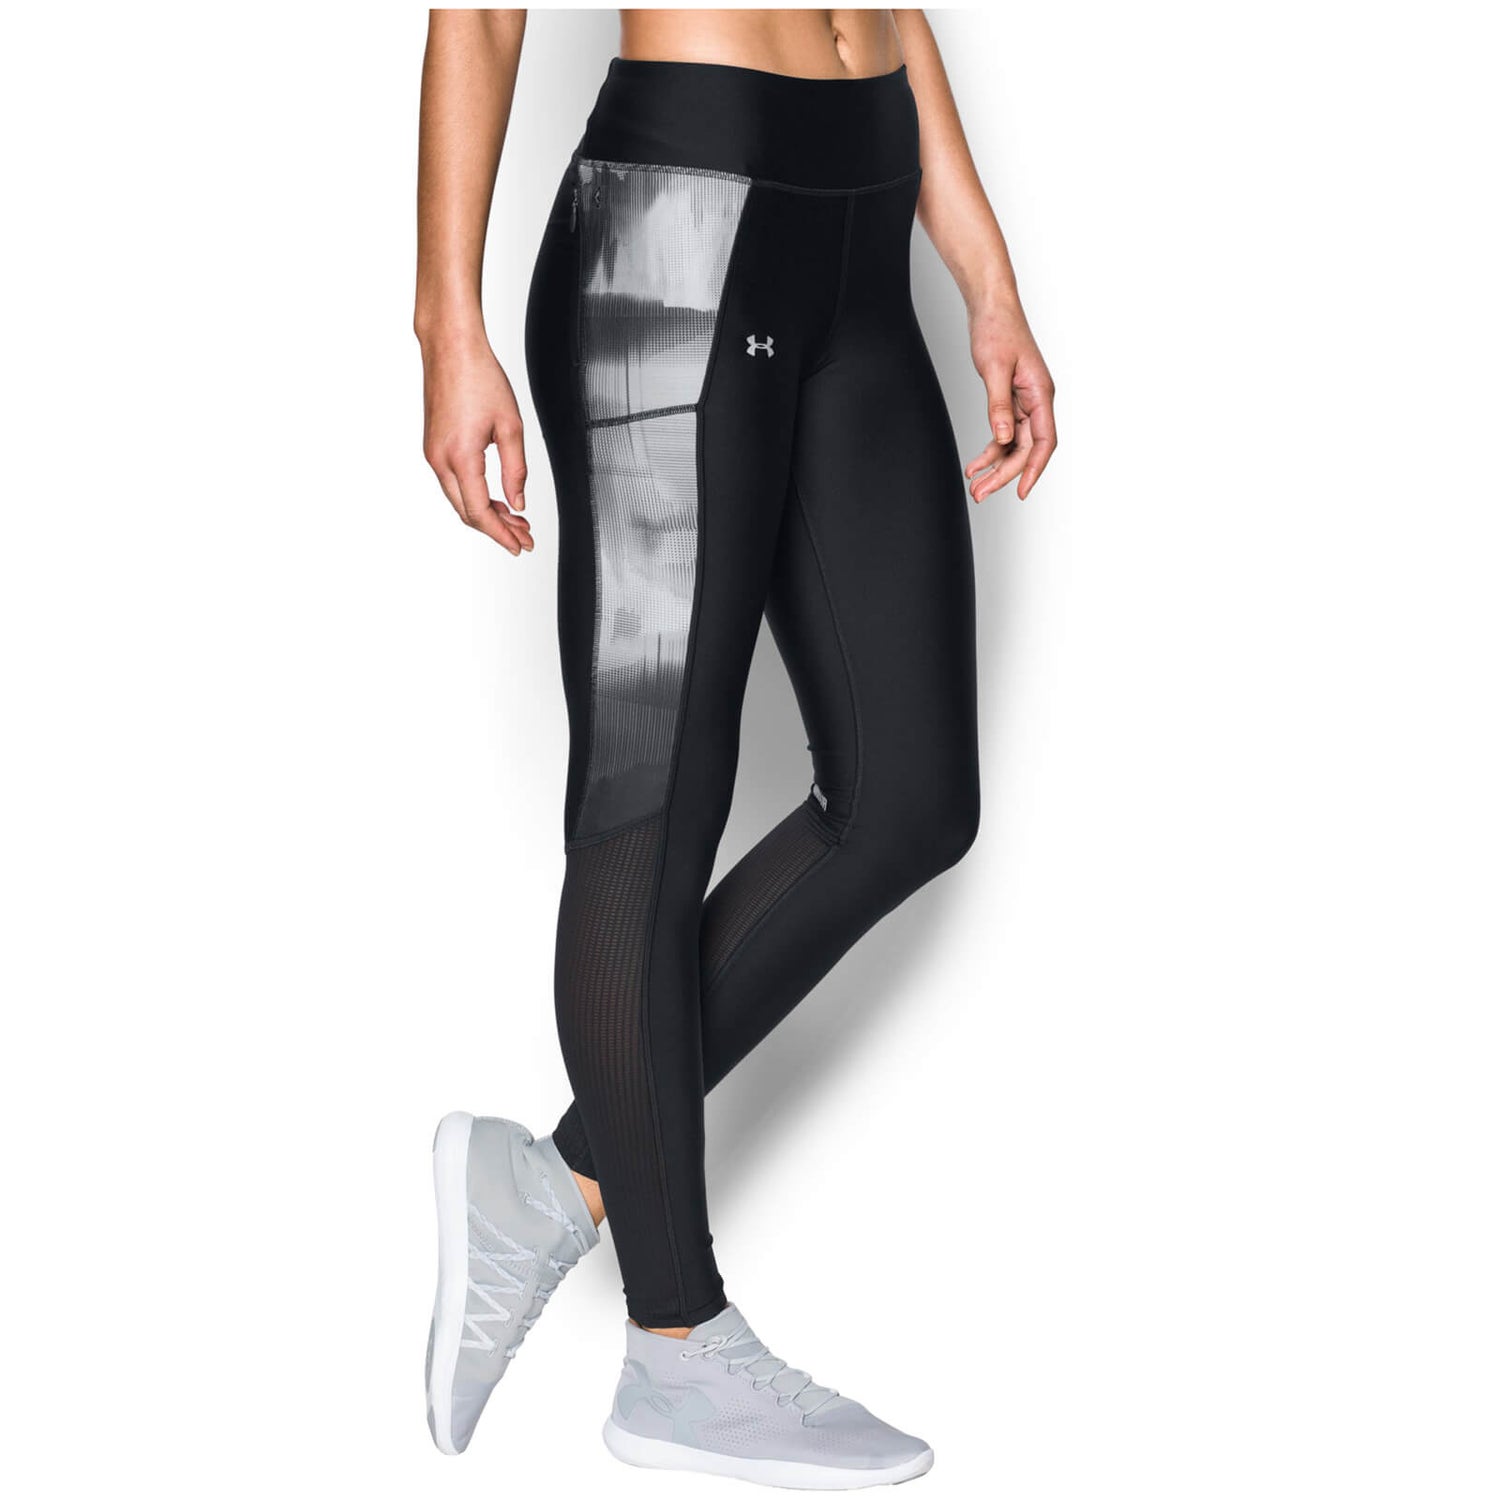 Post ironie Tien Under Armour Women's Fly By Printed Run Tights - Black/Reflective |  ProBikeKitジャパン